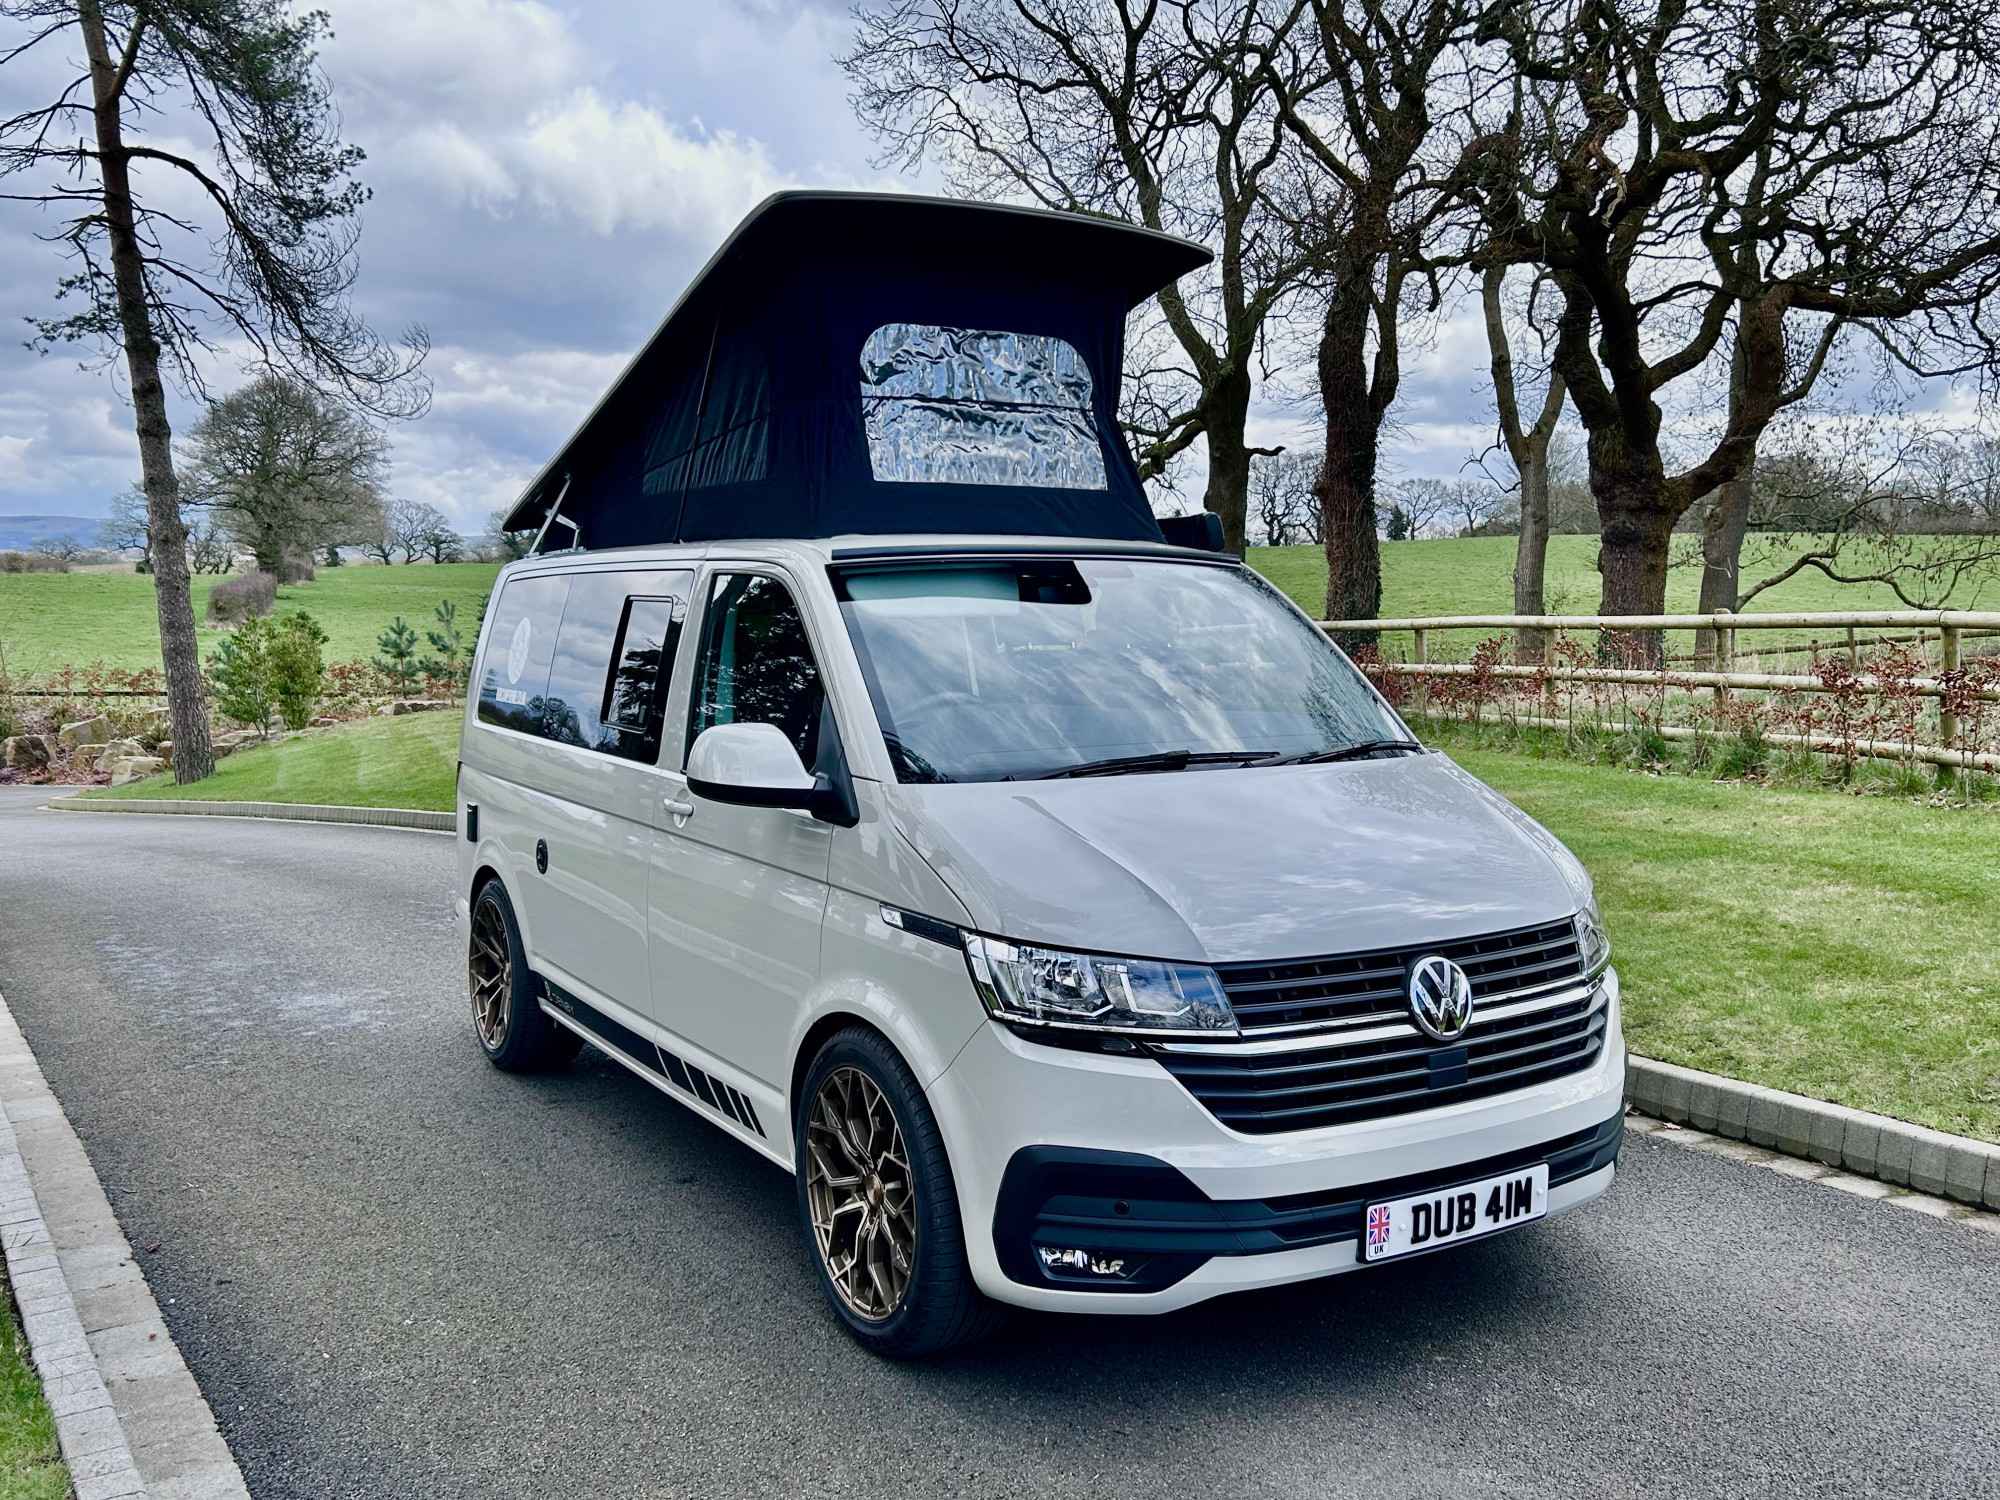 A VW T6 Campervan called Nessa and for hire in Stockport, England